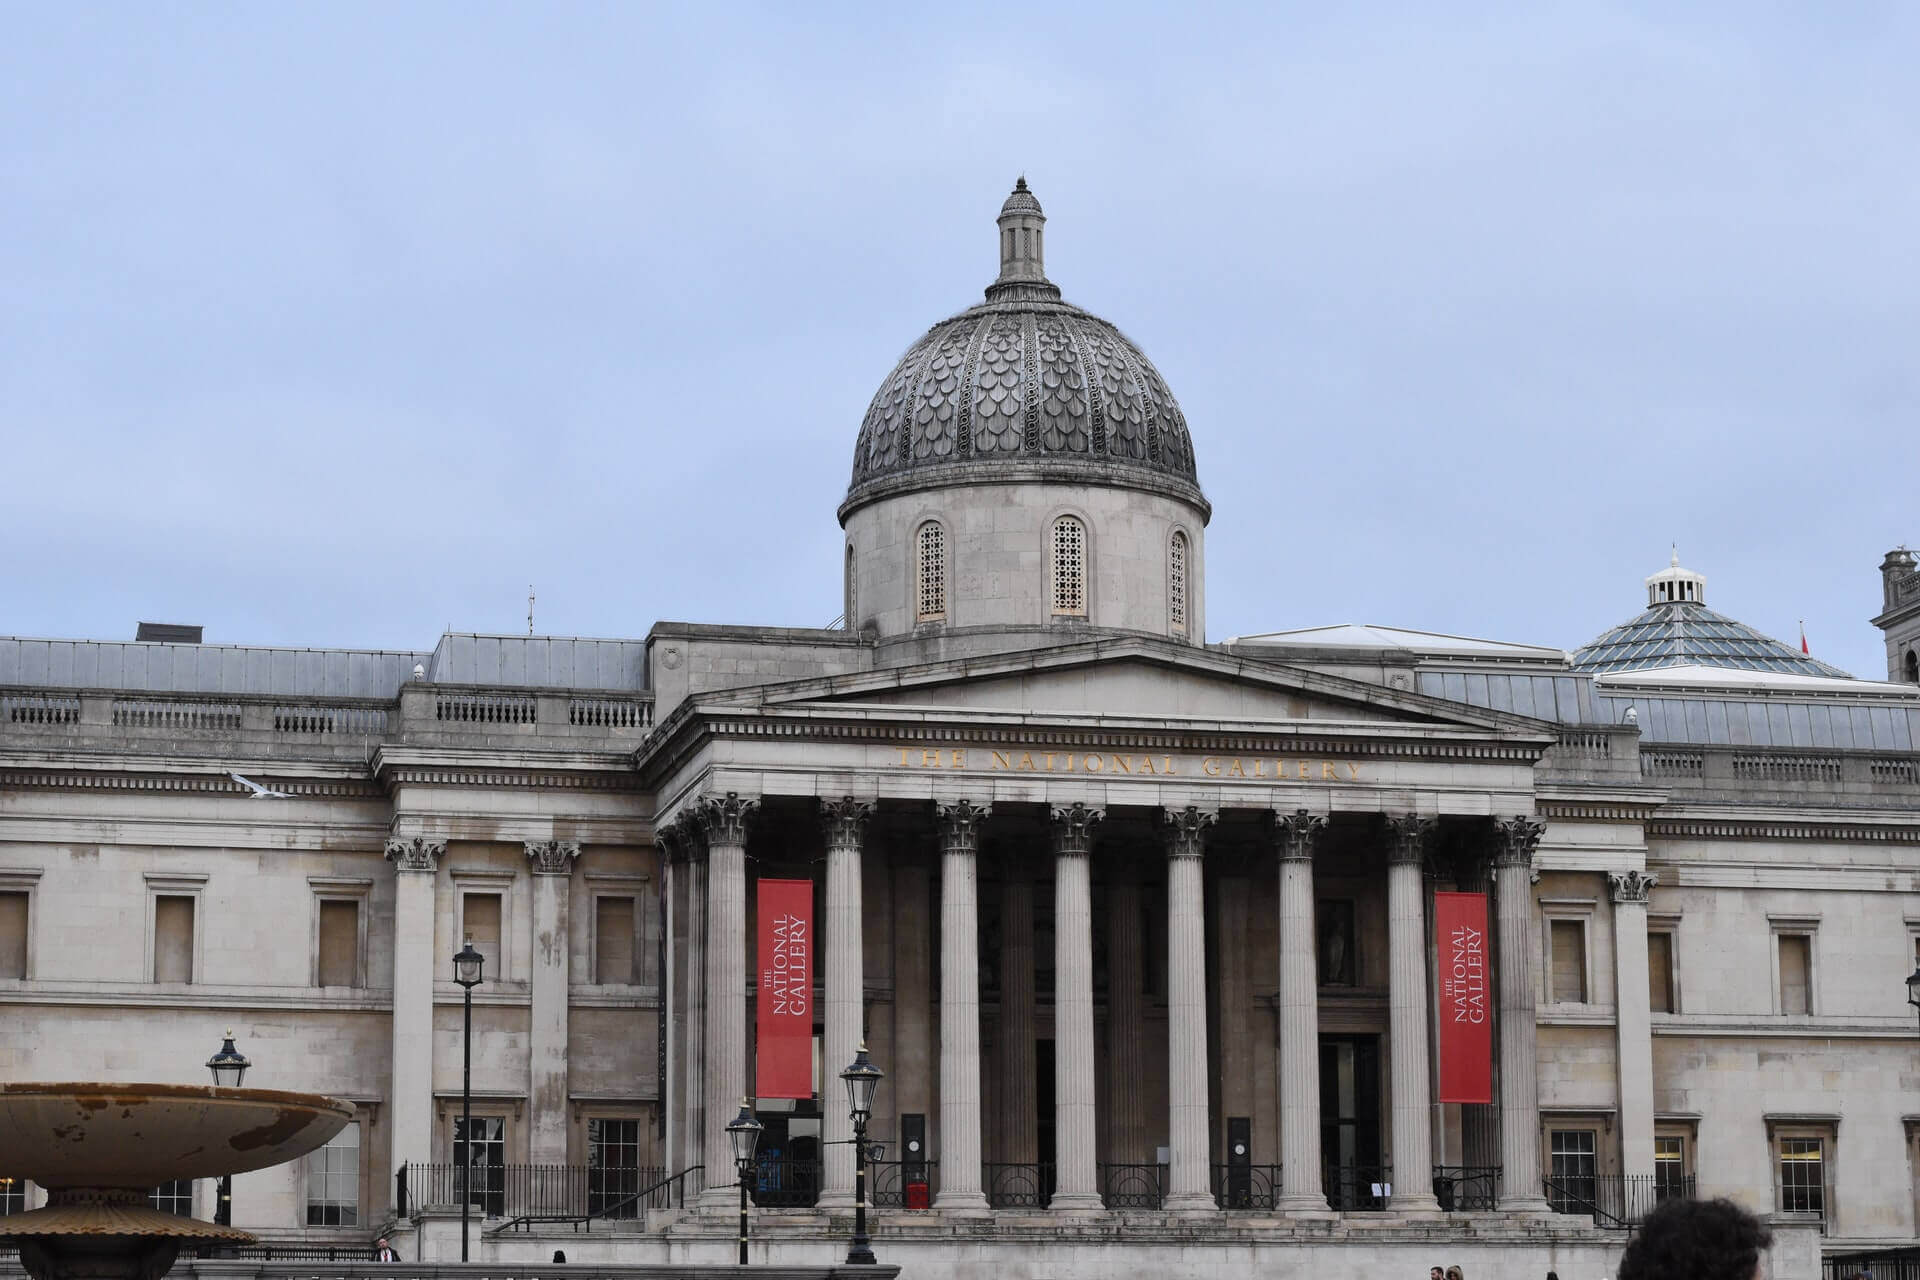 National Gallery exhibtions